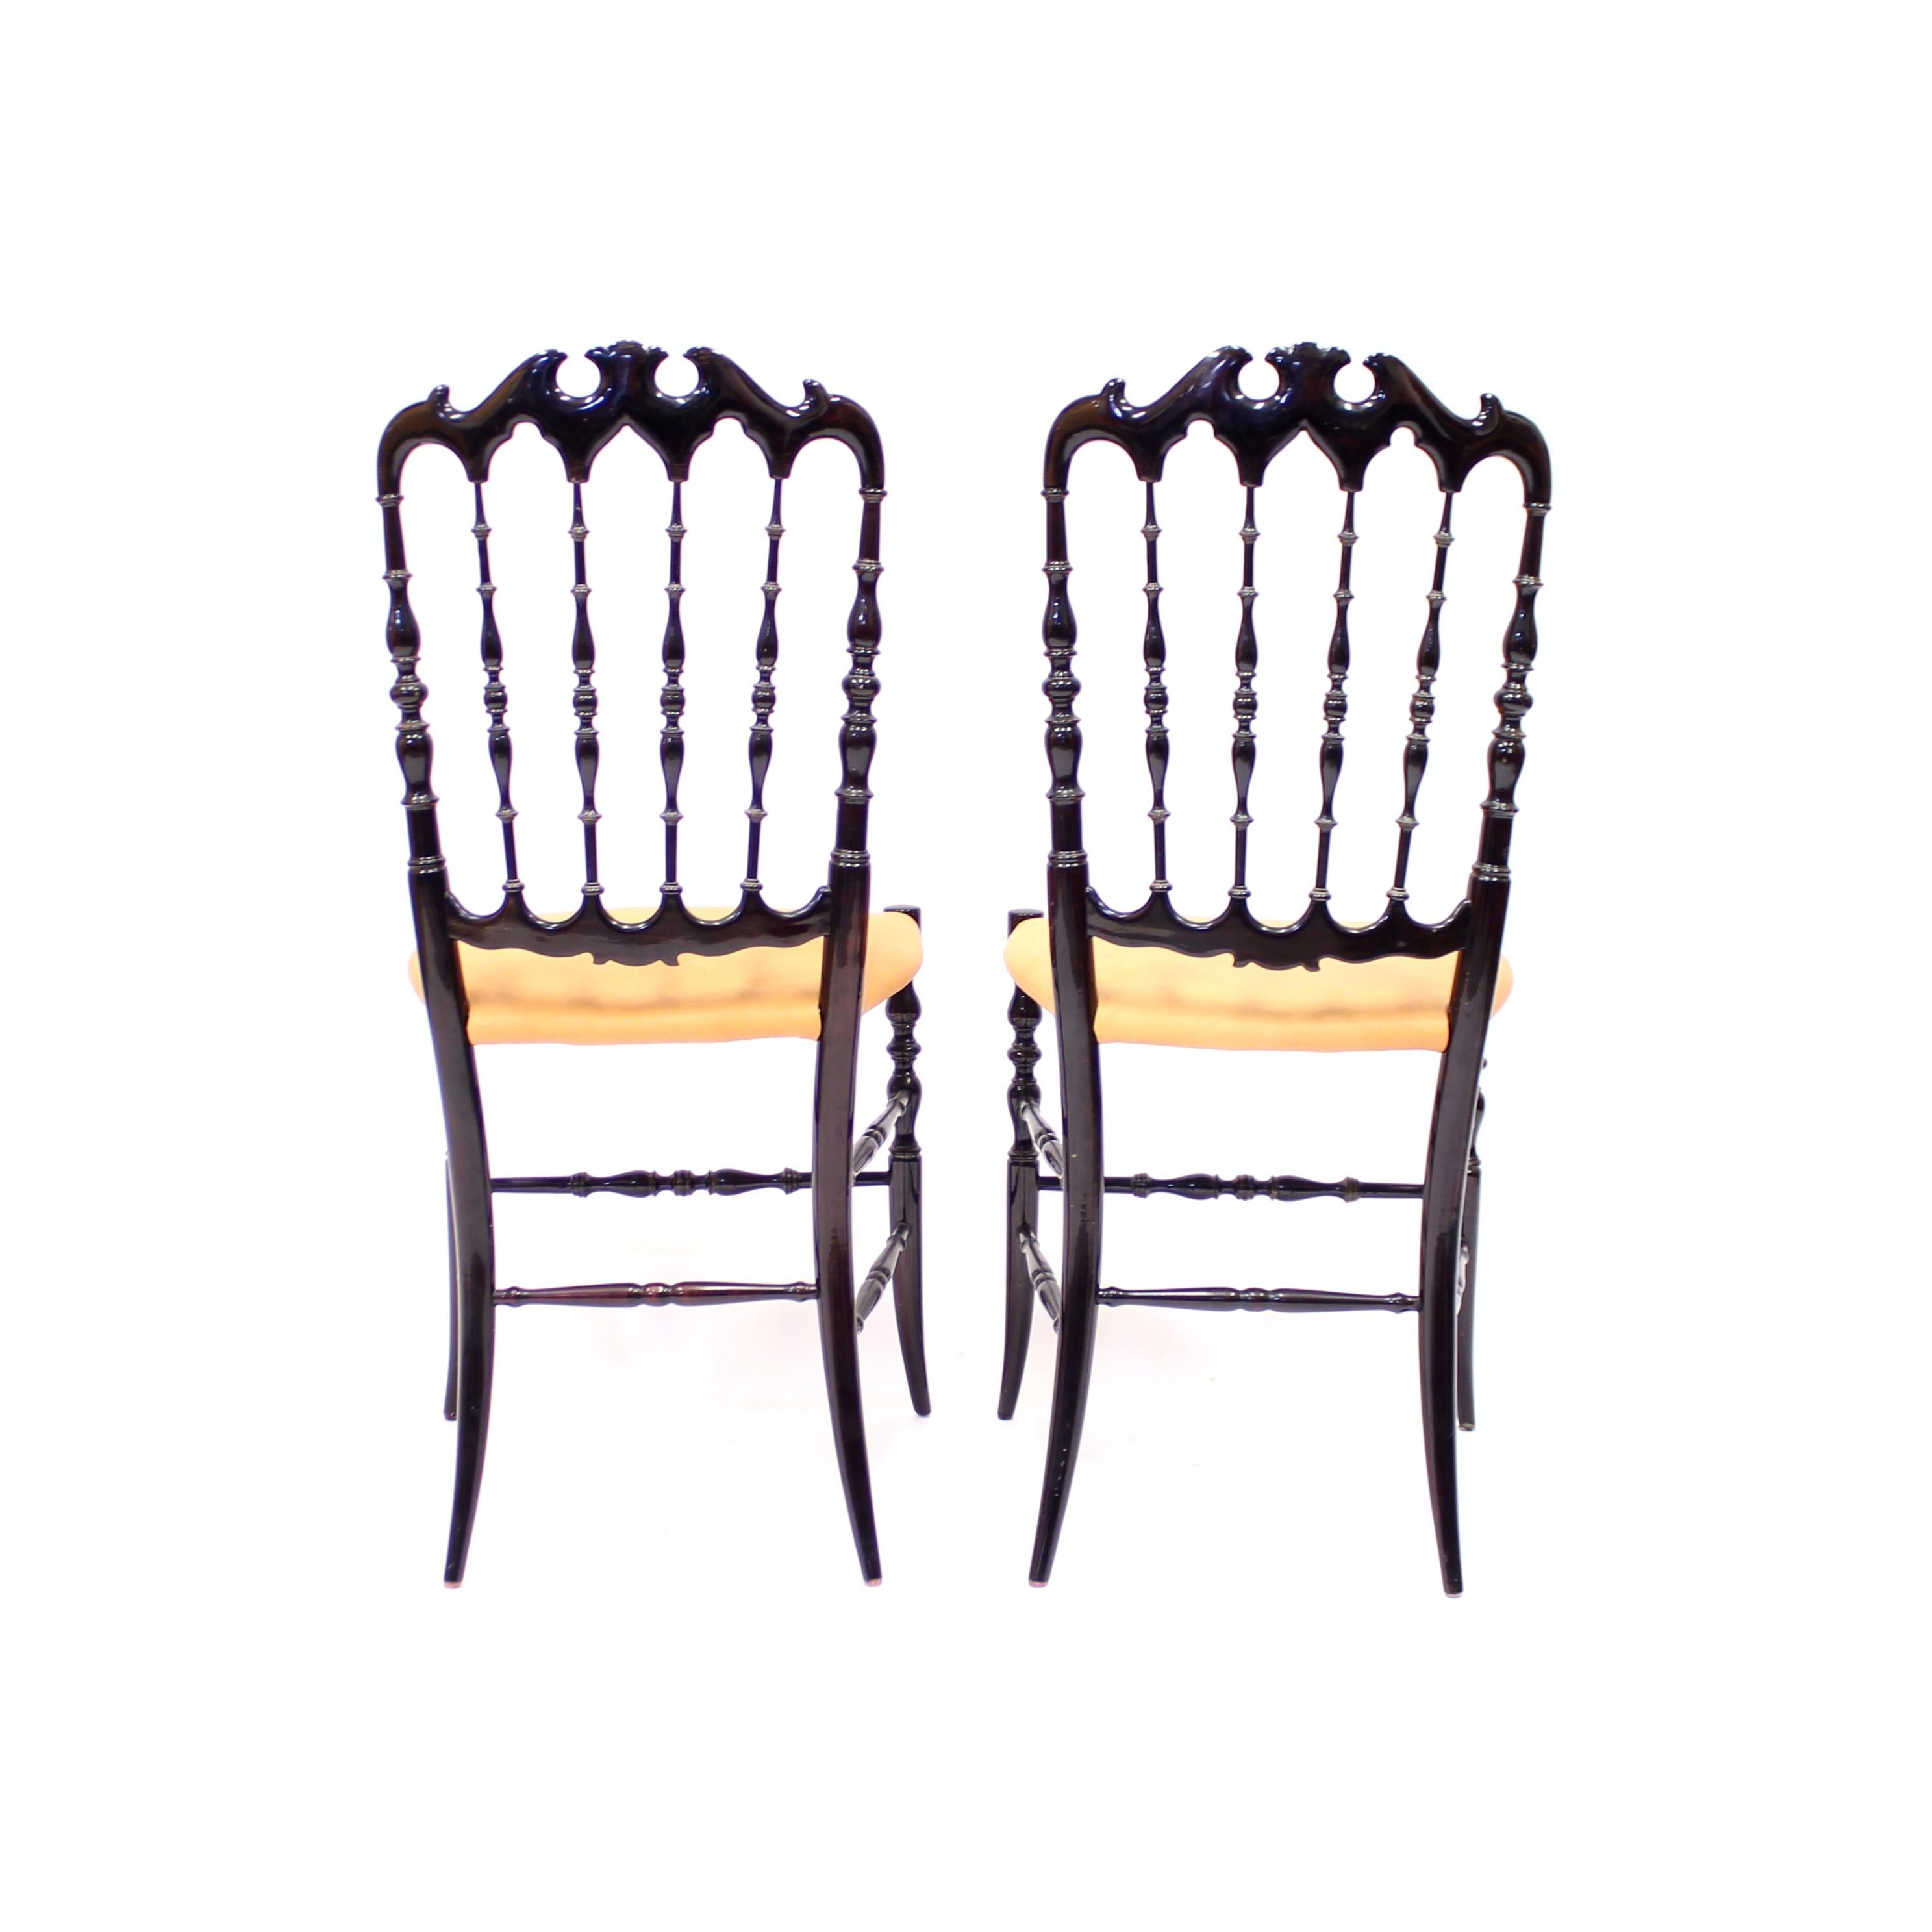 Pair of Vintage Chiavari Chairs with Leather Seats, circa 1950 5